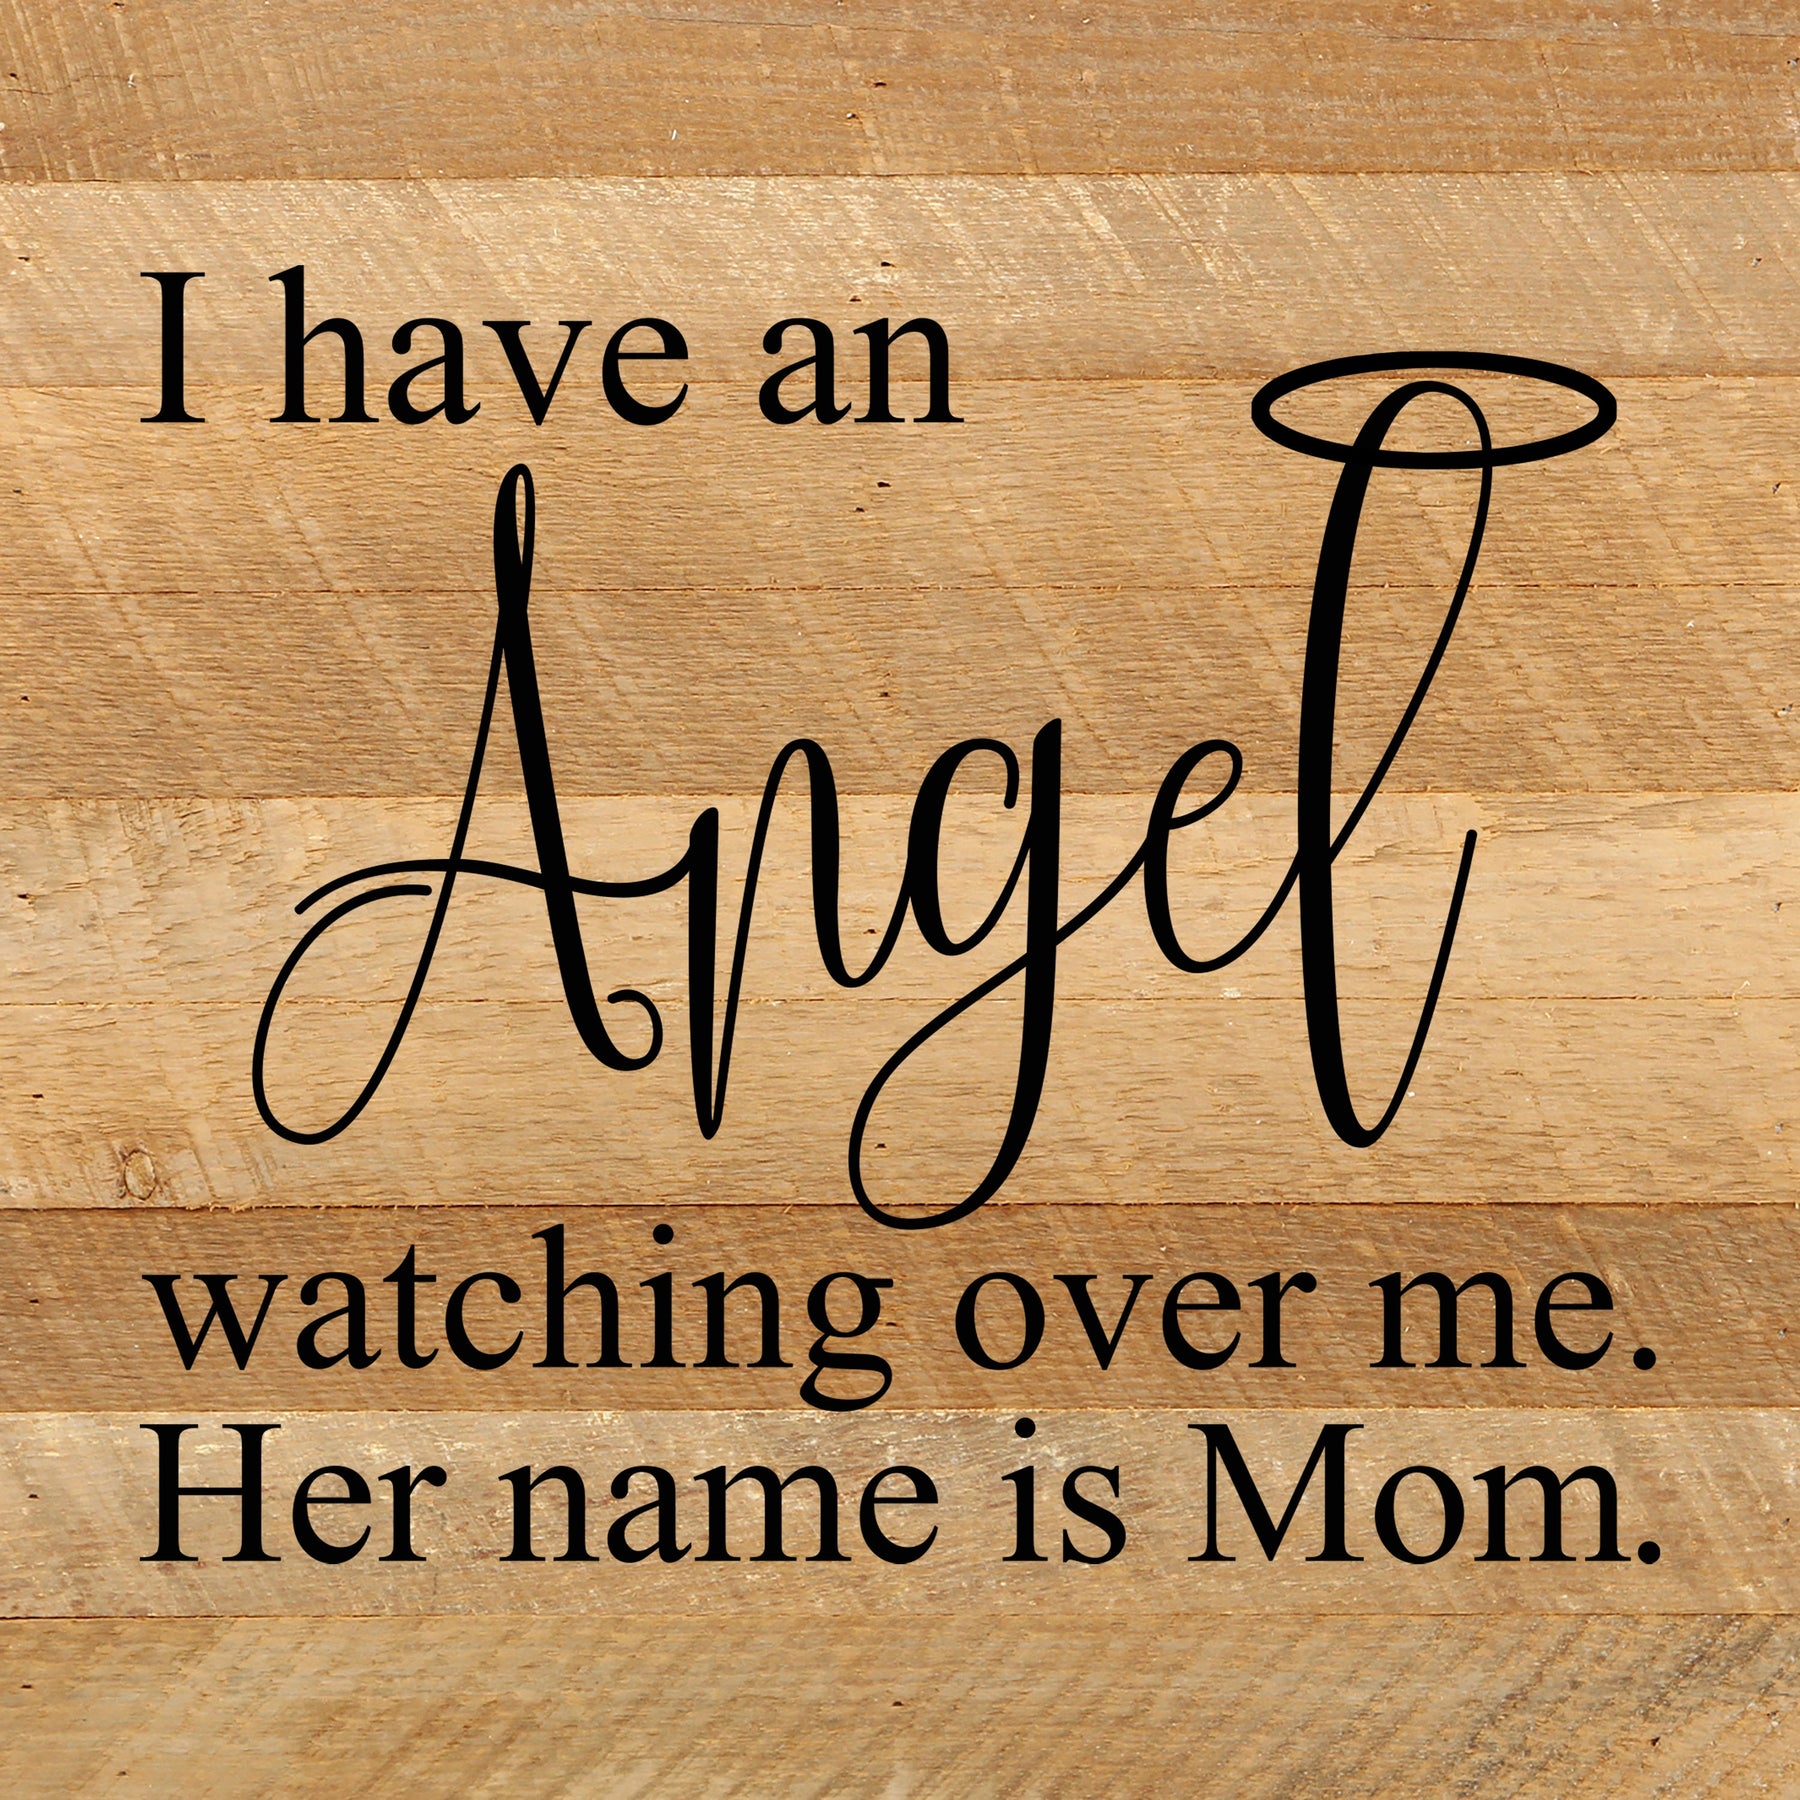 I have an angel watching over me. Her name is Mom. / 10"x10" Reclaimed Wood Sign